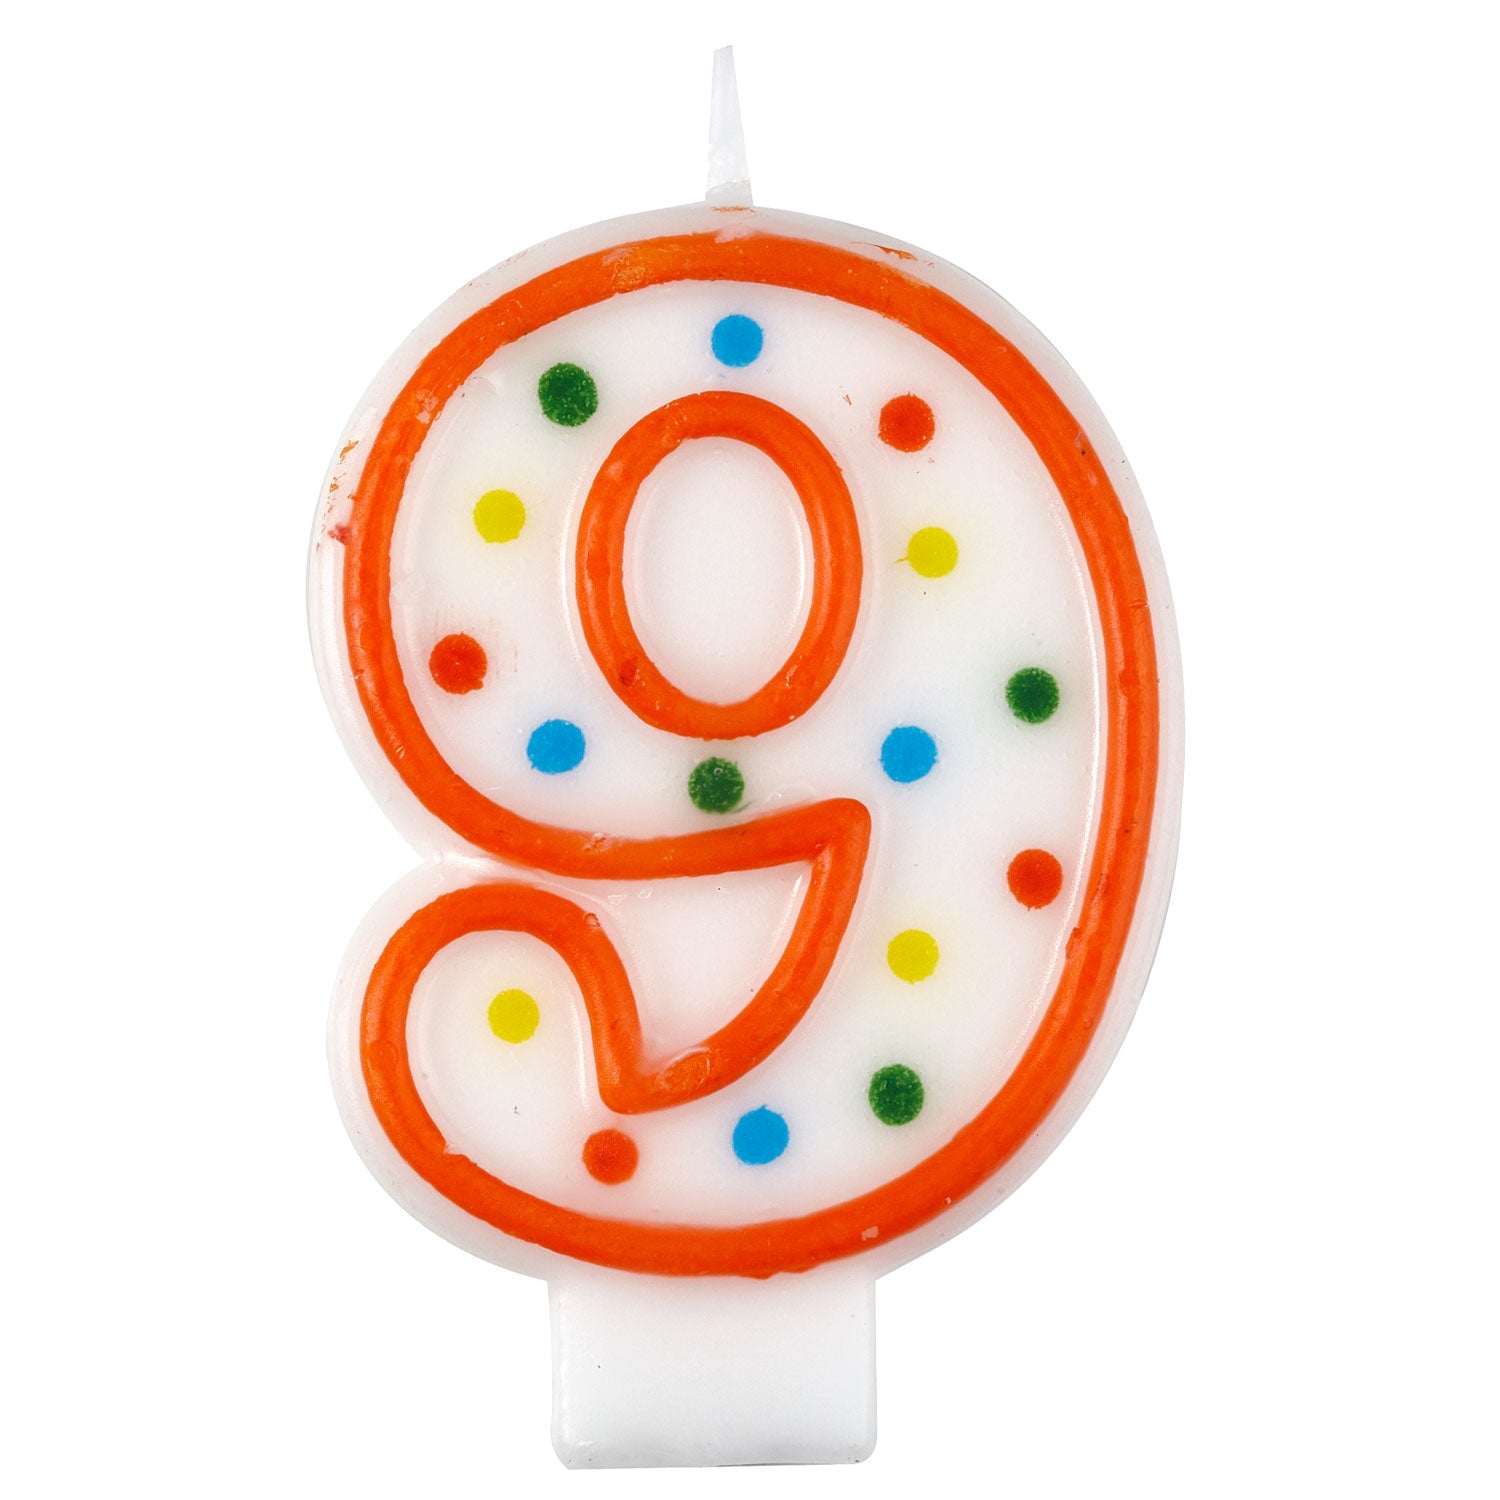 Number Candle, 9. Candle height 7.5cm (approx).